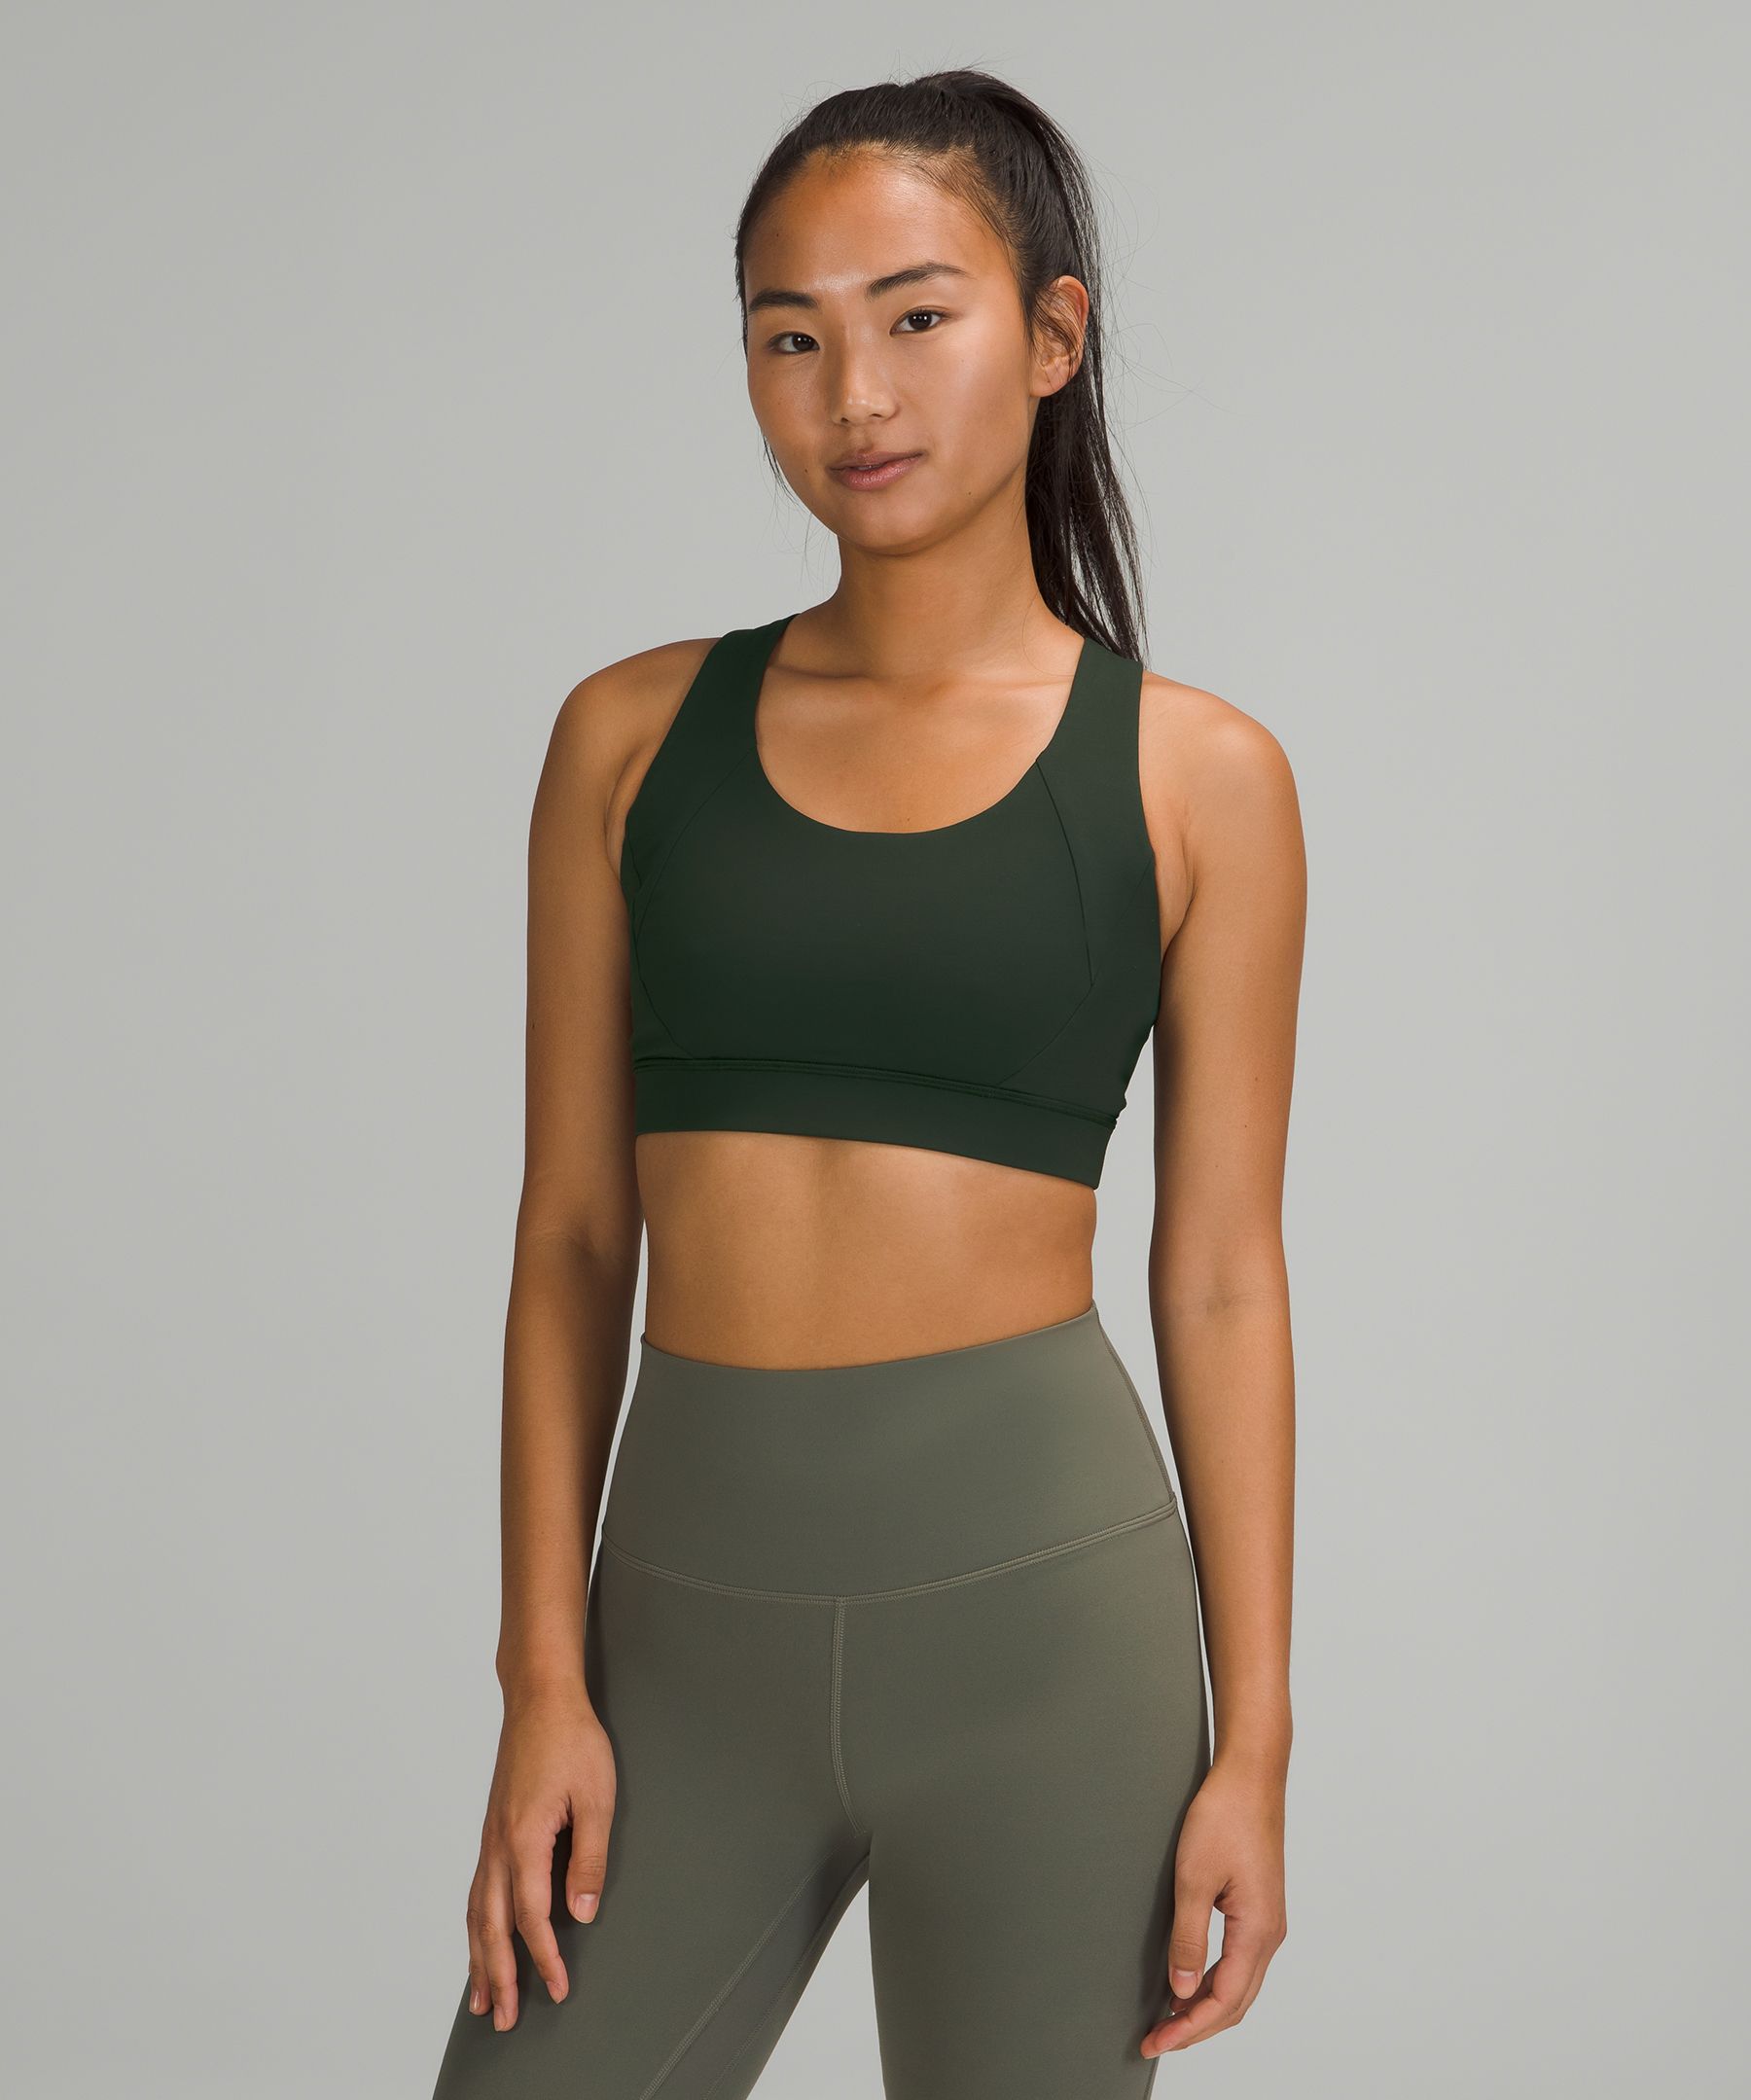 Lululemon Free To Be Elevated Bra Light Support, Dd/ddd(e) Cup In Rainforest Green/green Twill